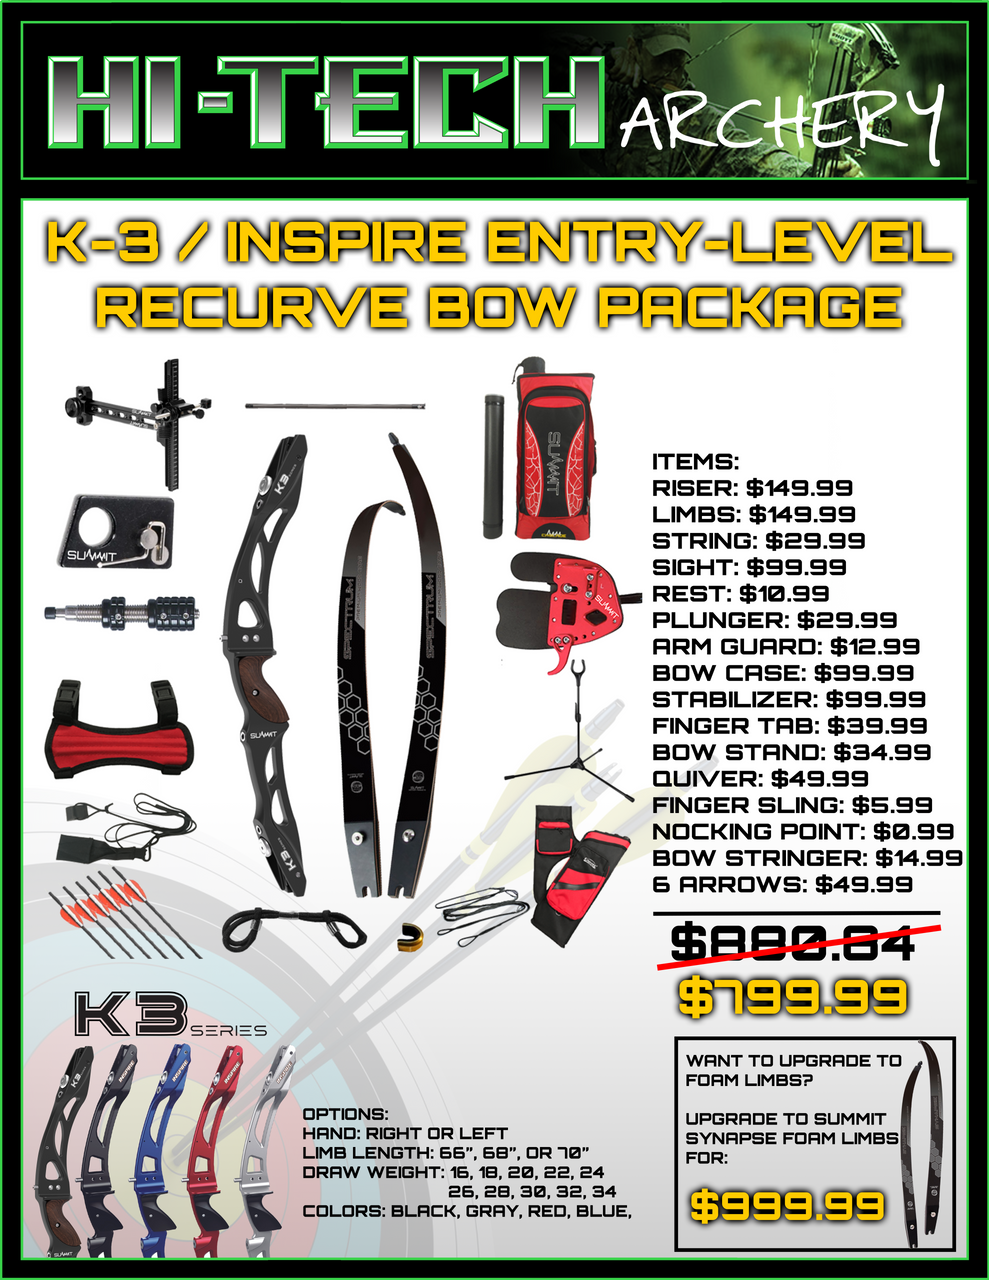 Summit K3 Entry Level Recurve Bow Package